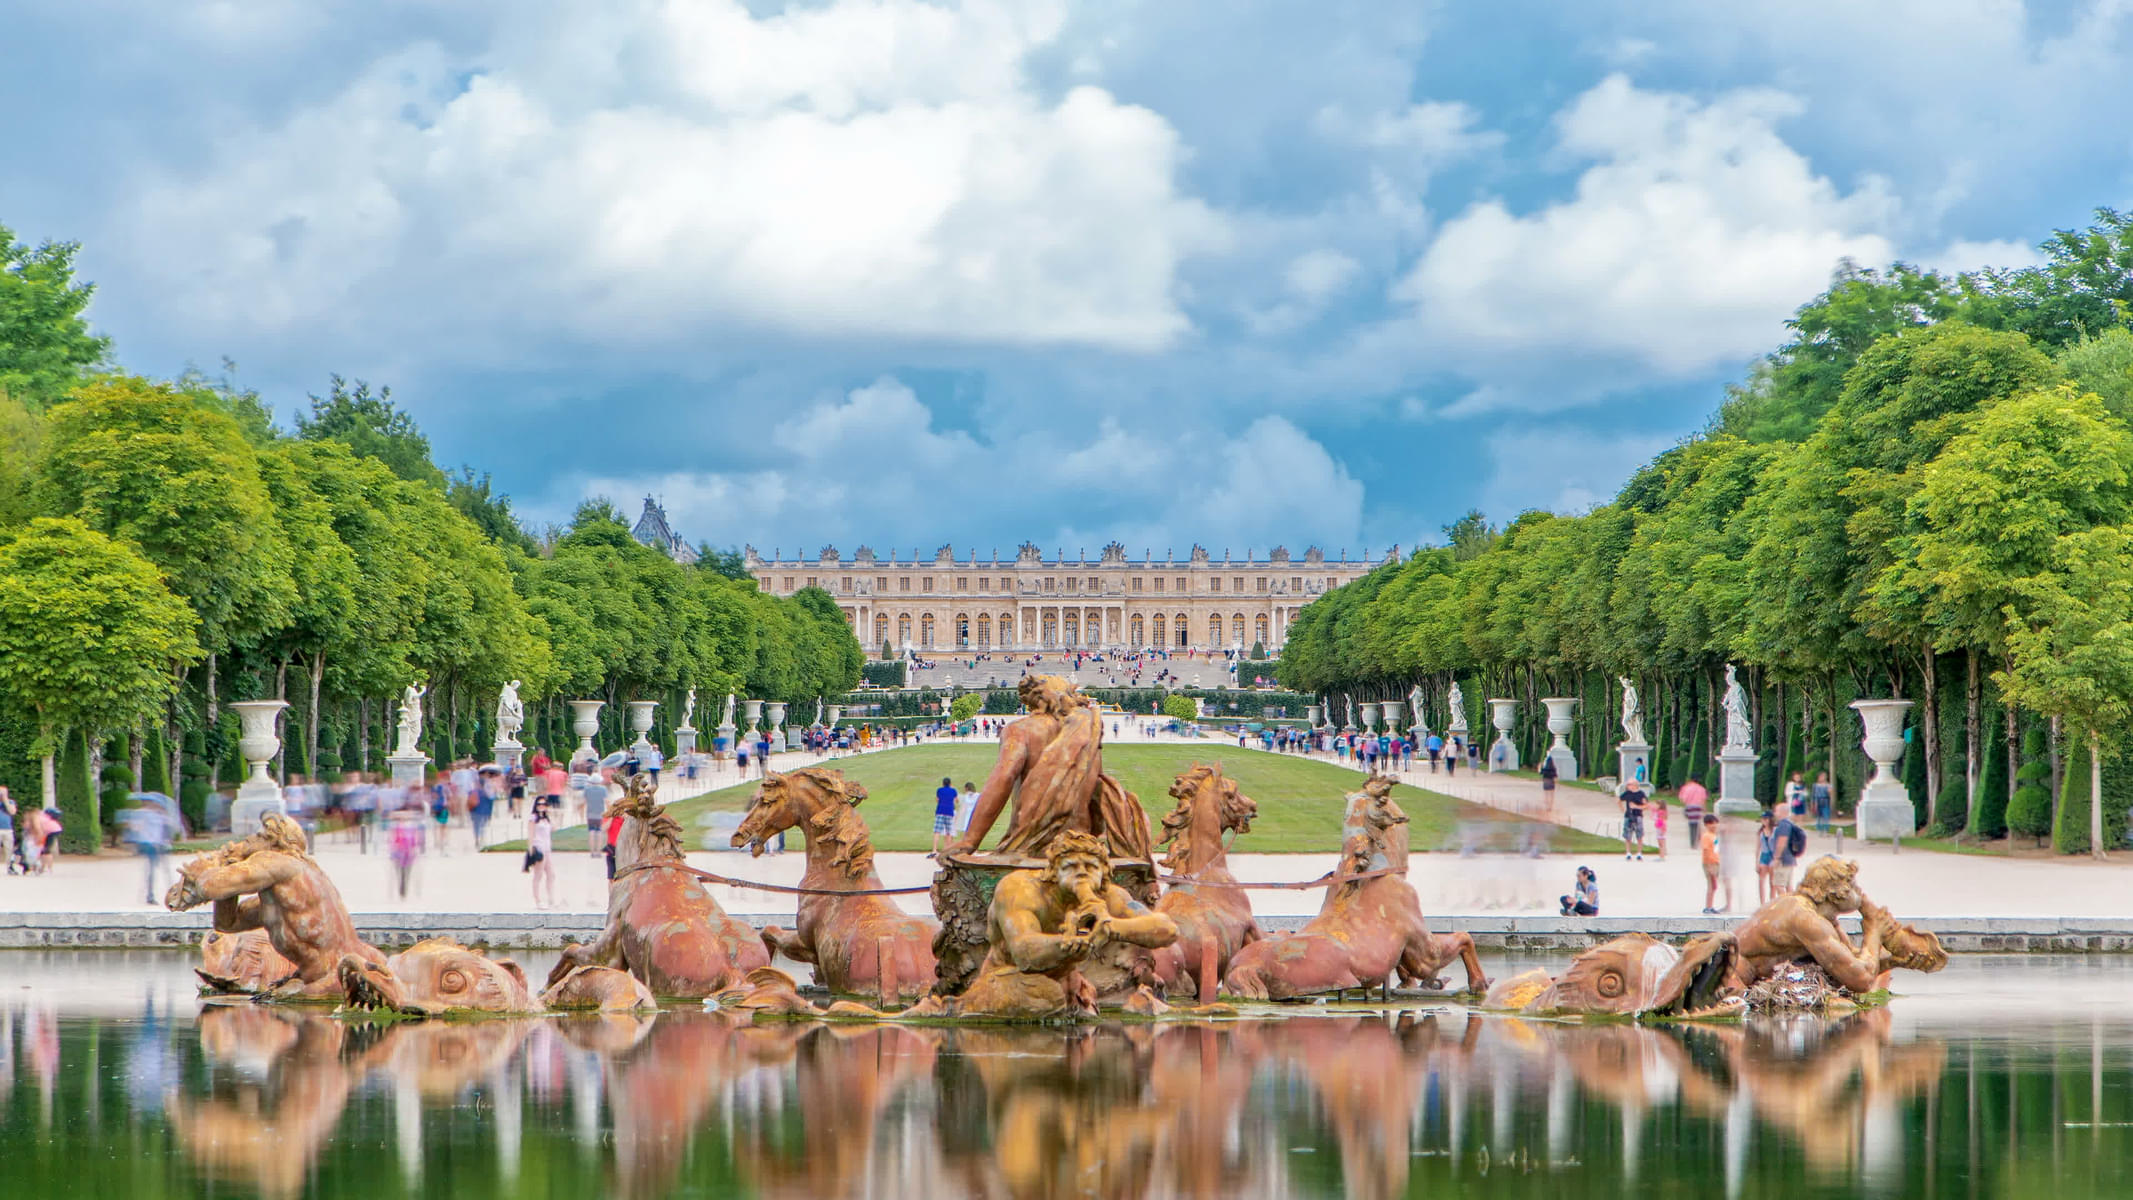 Learn more about the history of the palace with the help of the guide